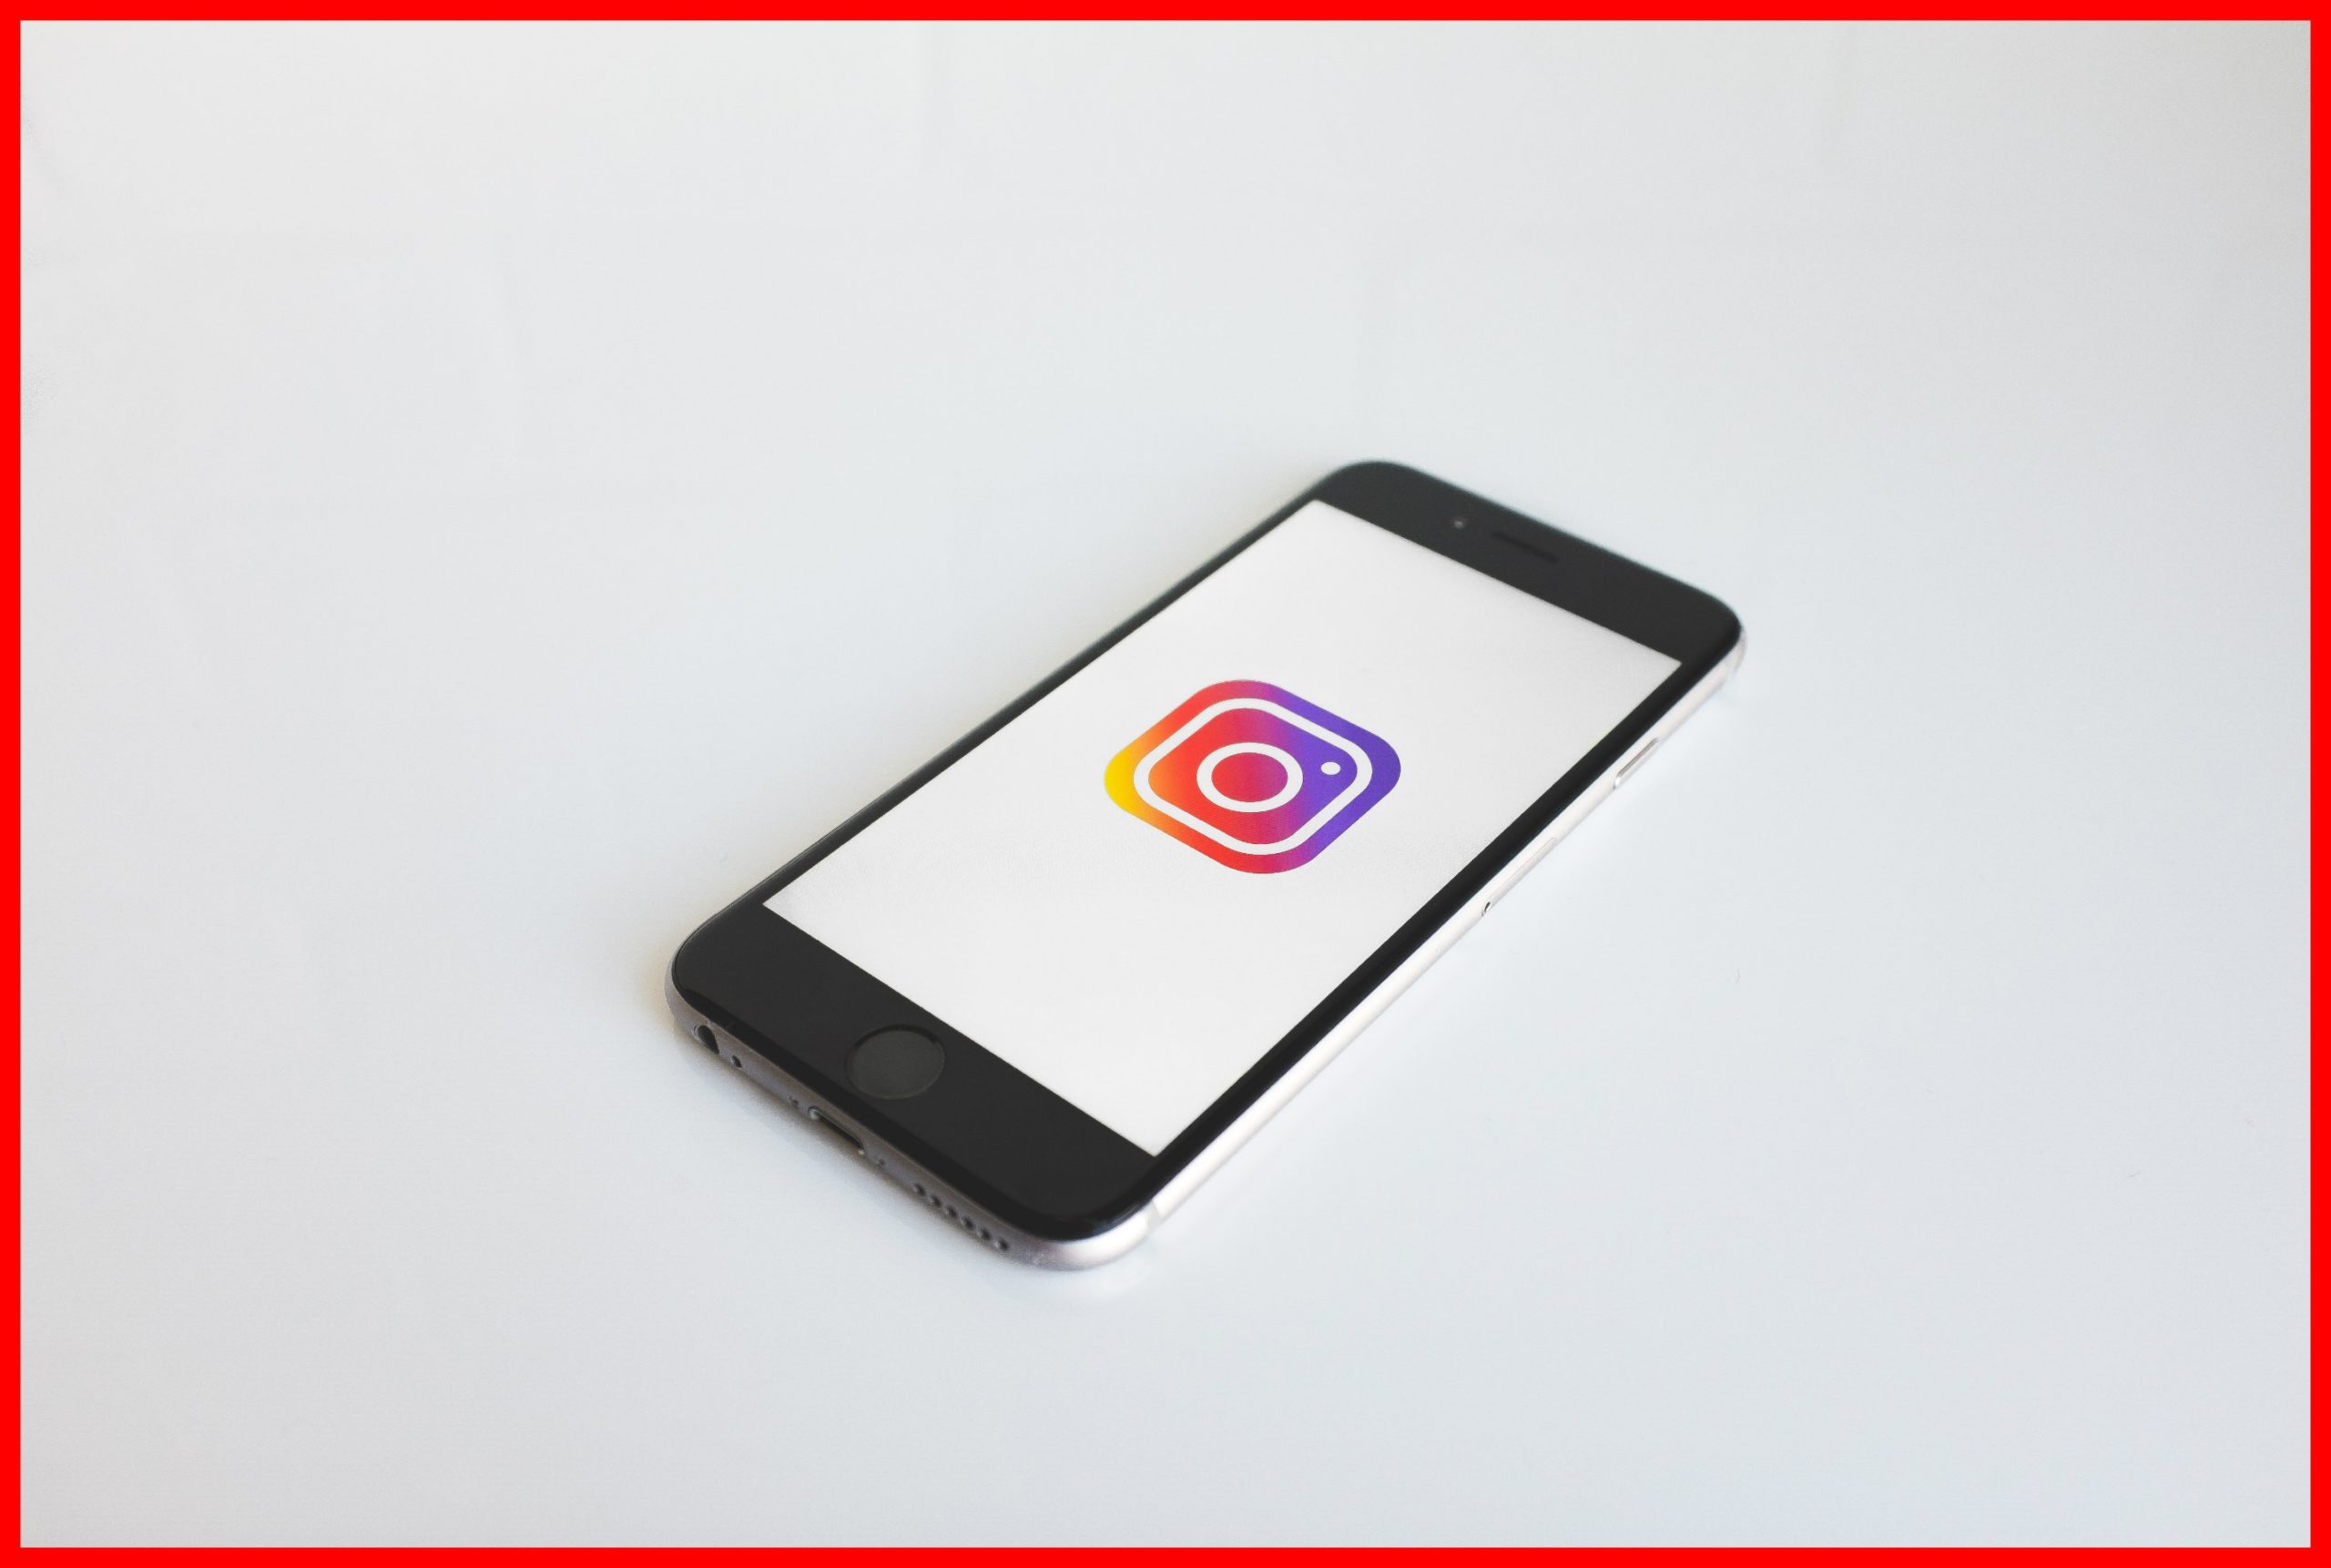 Cannabis and Instagram: Do’s & Don’ts